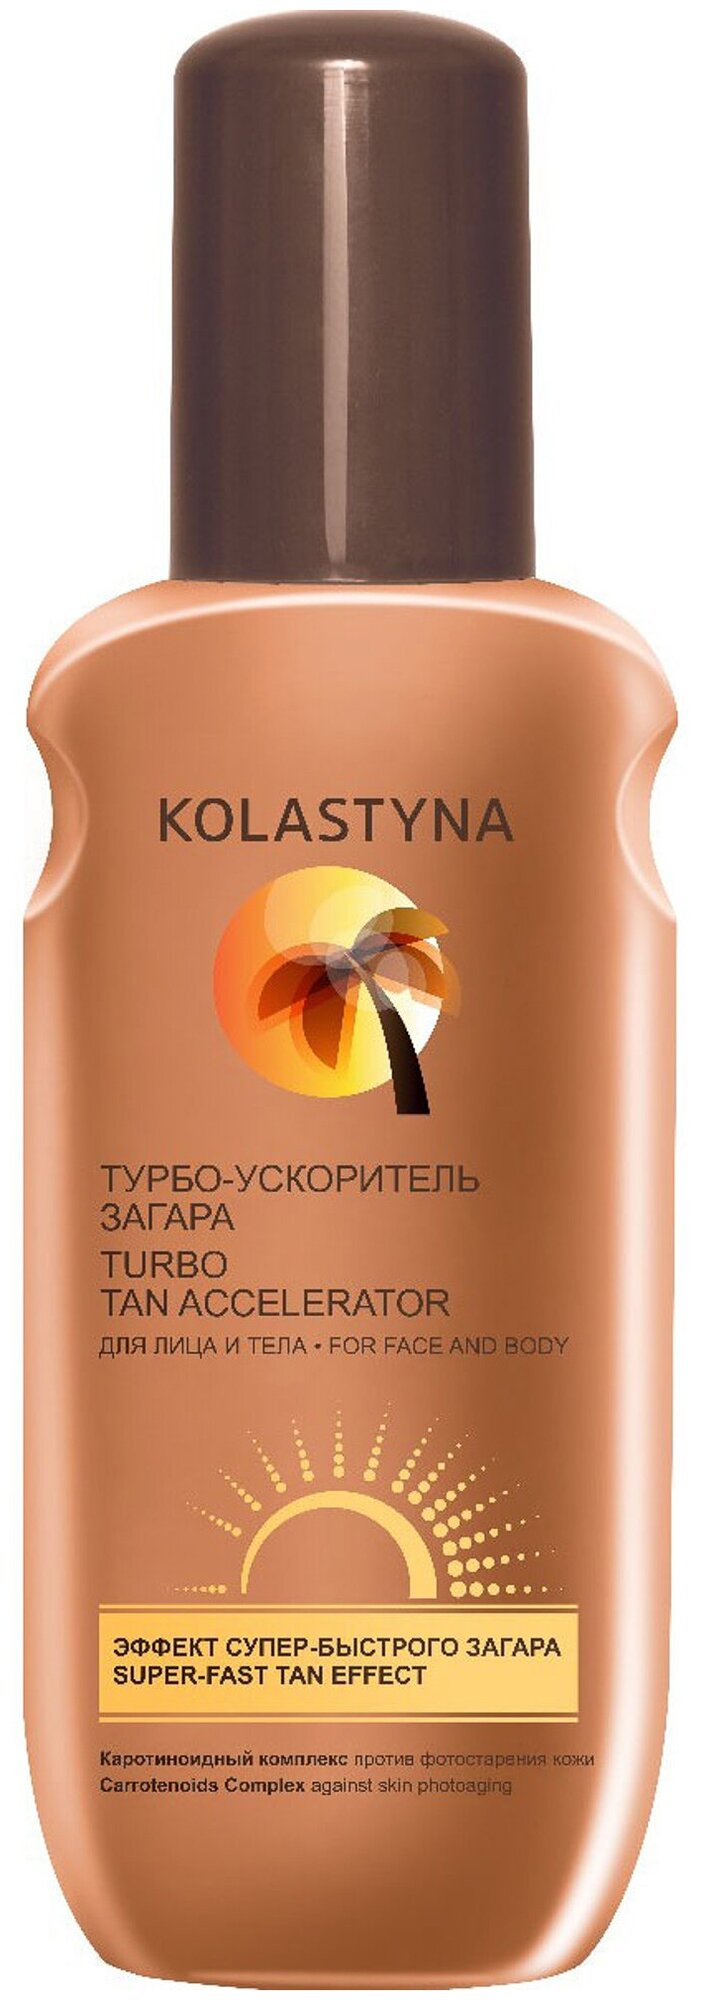 Lather my sexy body in tanning oil